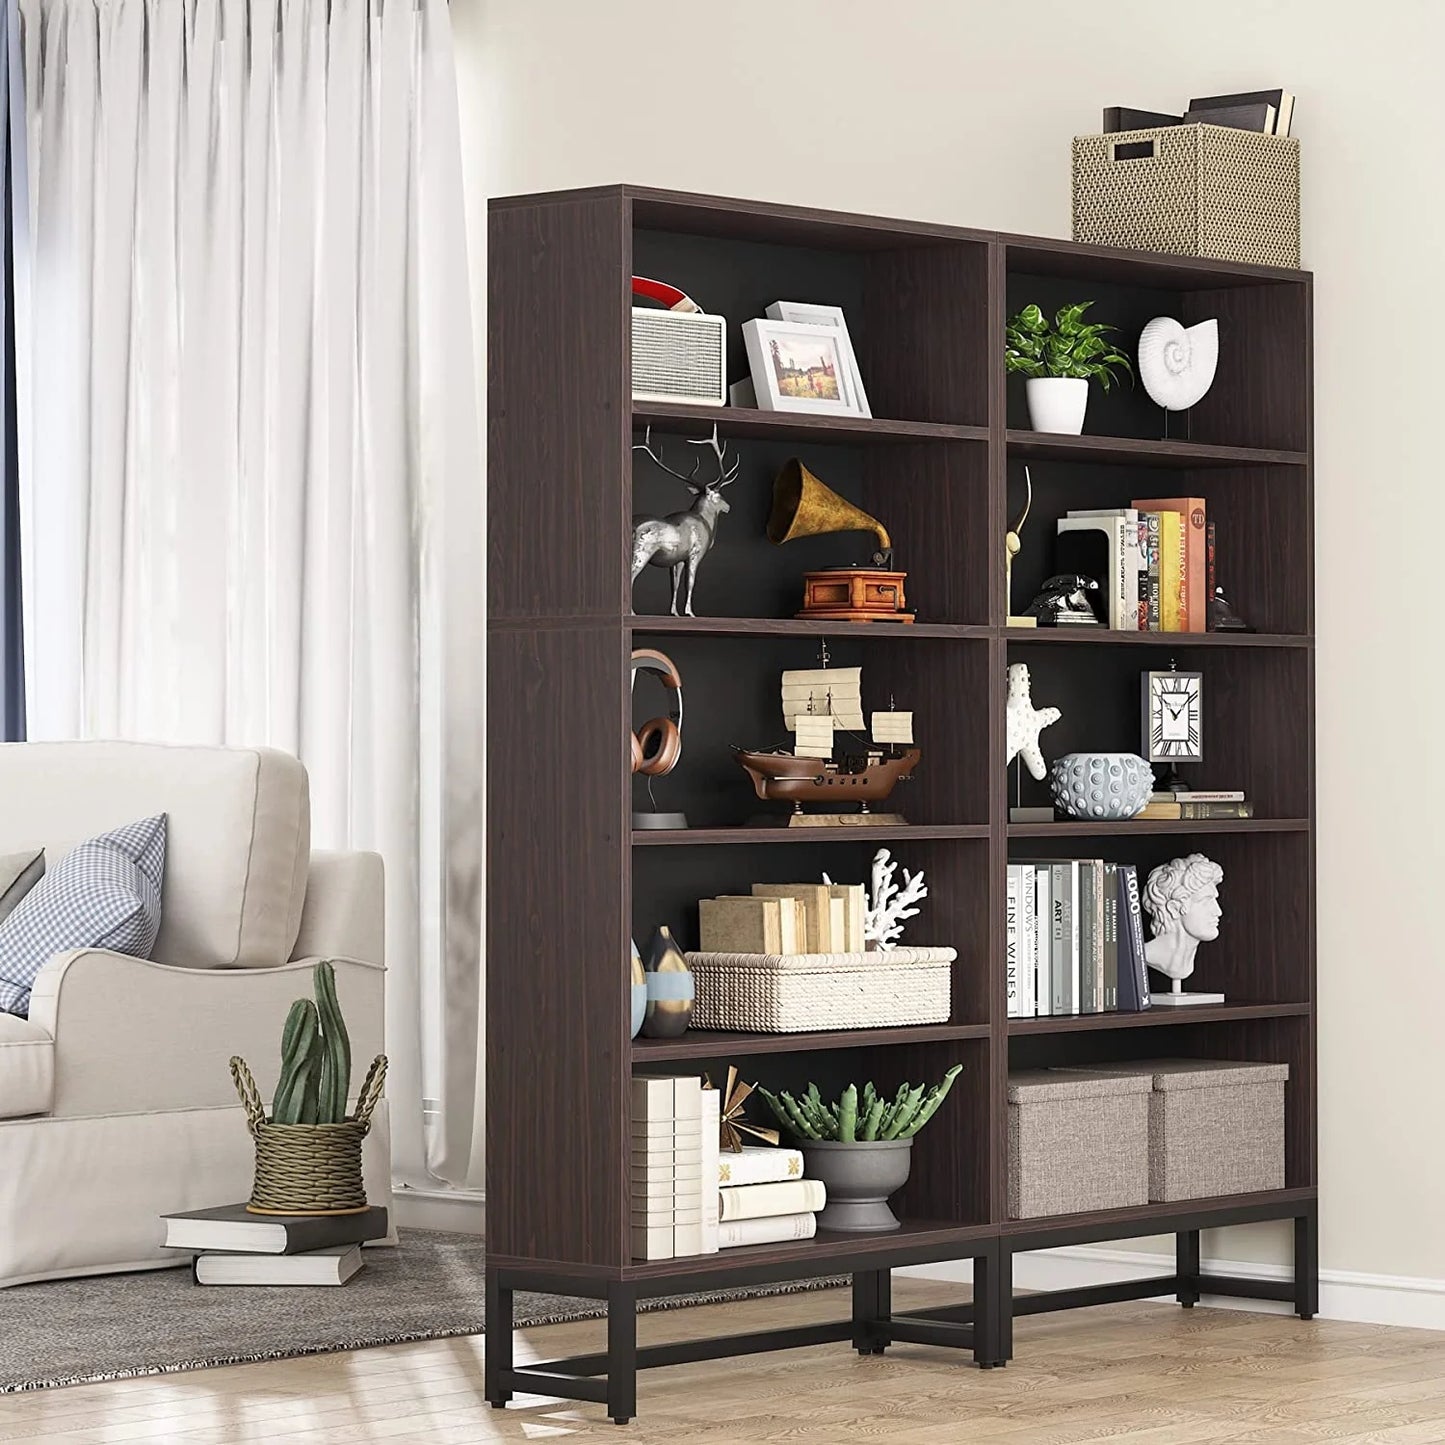 Tribesigns Tall Bookcase and Bookshelf, 70.8” Large Bookcases Organizer